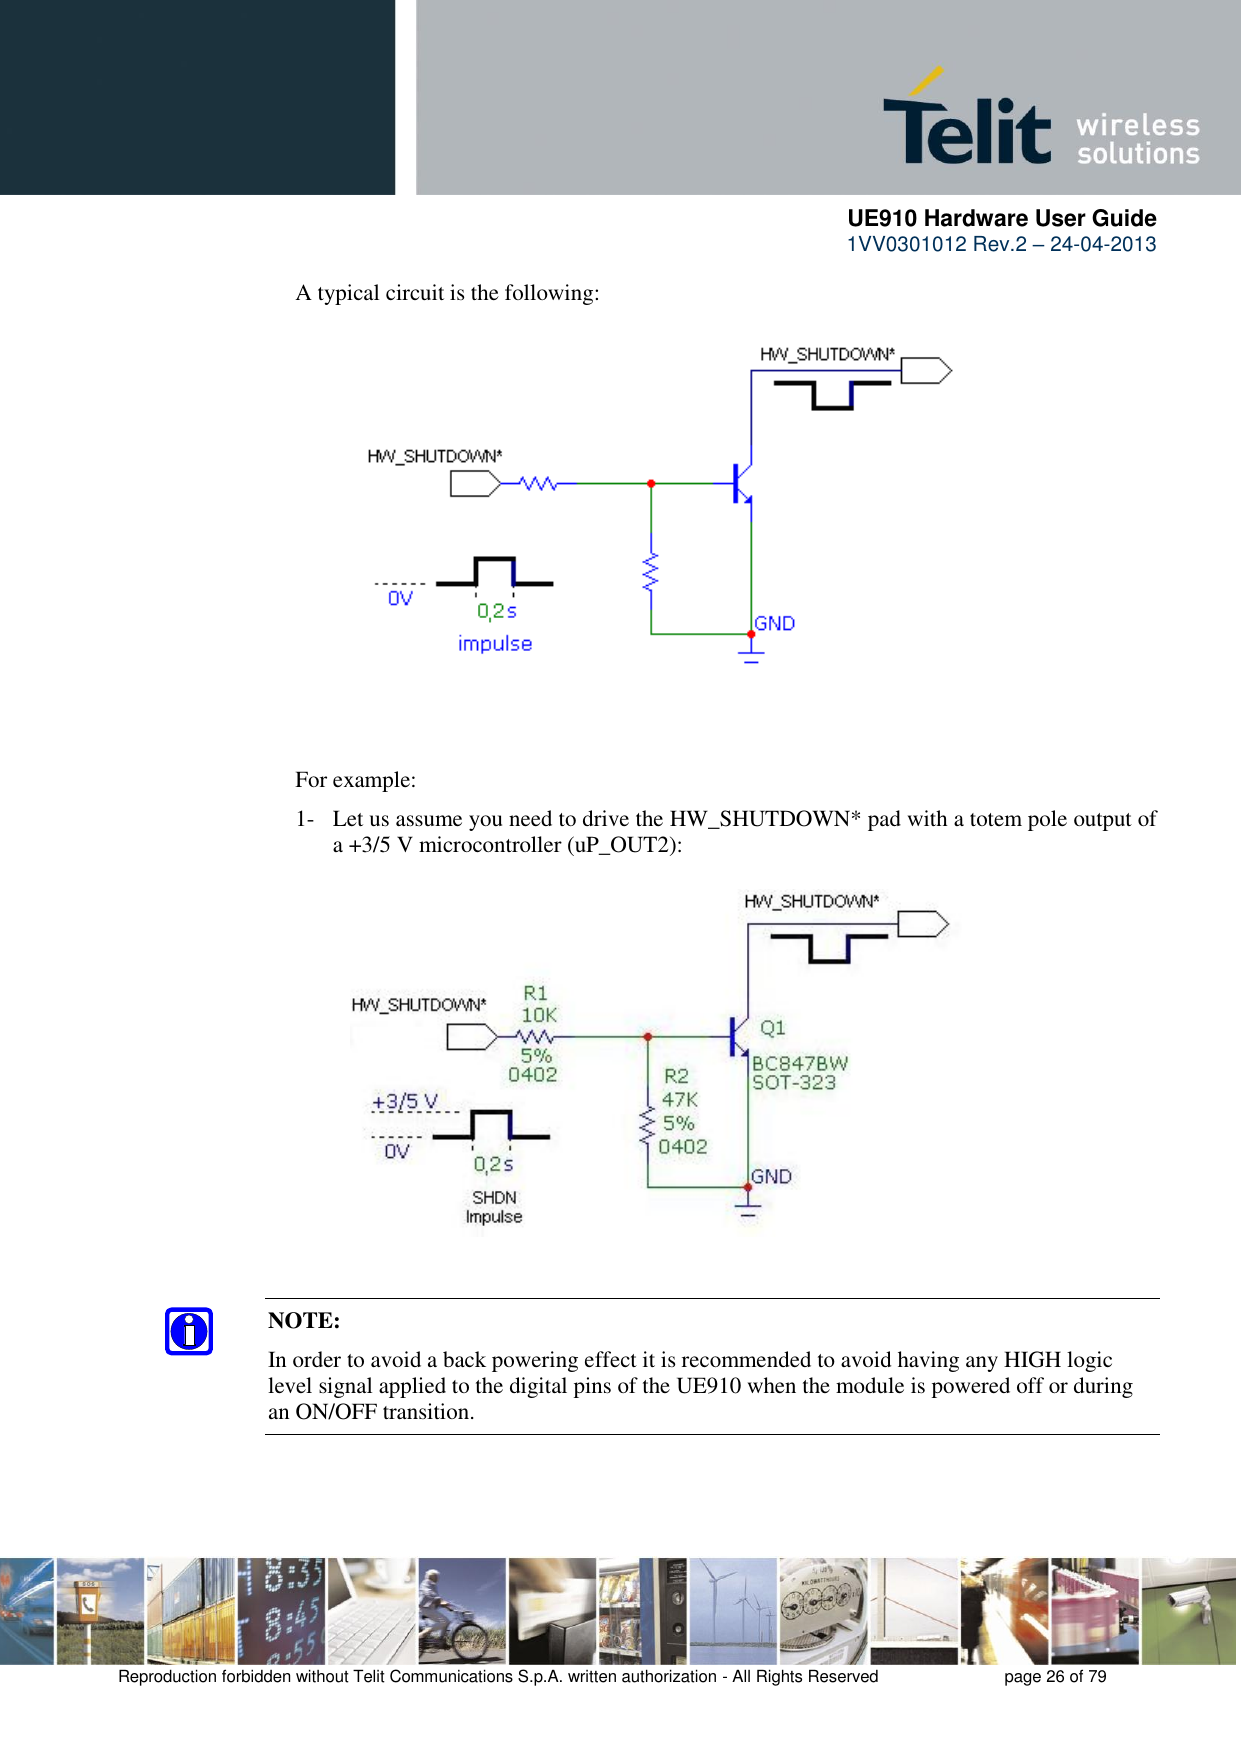      UE910 Hardware User Guide  1VV0301012 Rev.2 – 24-04-2013    Reproduction forbidden without Telit Communications S.p.A. written authorization - All Rights Reserved    page 26 of 79  A typical circuit is the following: For example: 1- Let us assume you need to drive the HW_SHUTDOWN* pad with a totem pole output of a +3/5 V microcontroller (uP_OUT2): NOTE: In order to avoid a back powering effect it is recommended to avoid having any HIGH logic level signal applied to the digital pins of the UE910 when the module is powered off or during an ON/OFF transition.    